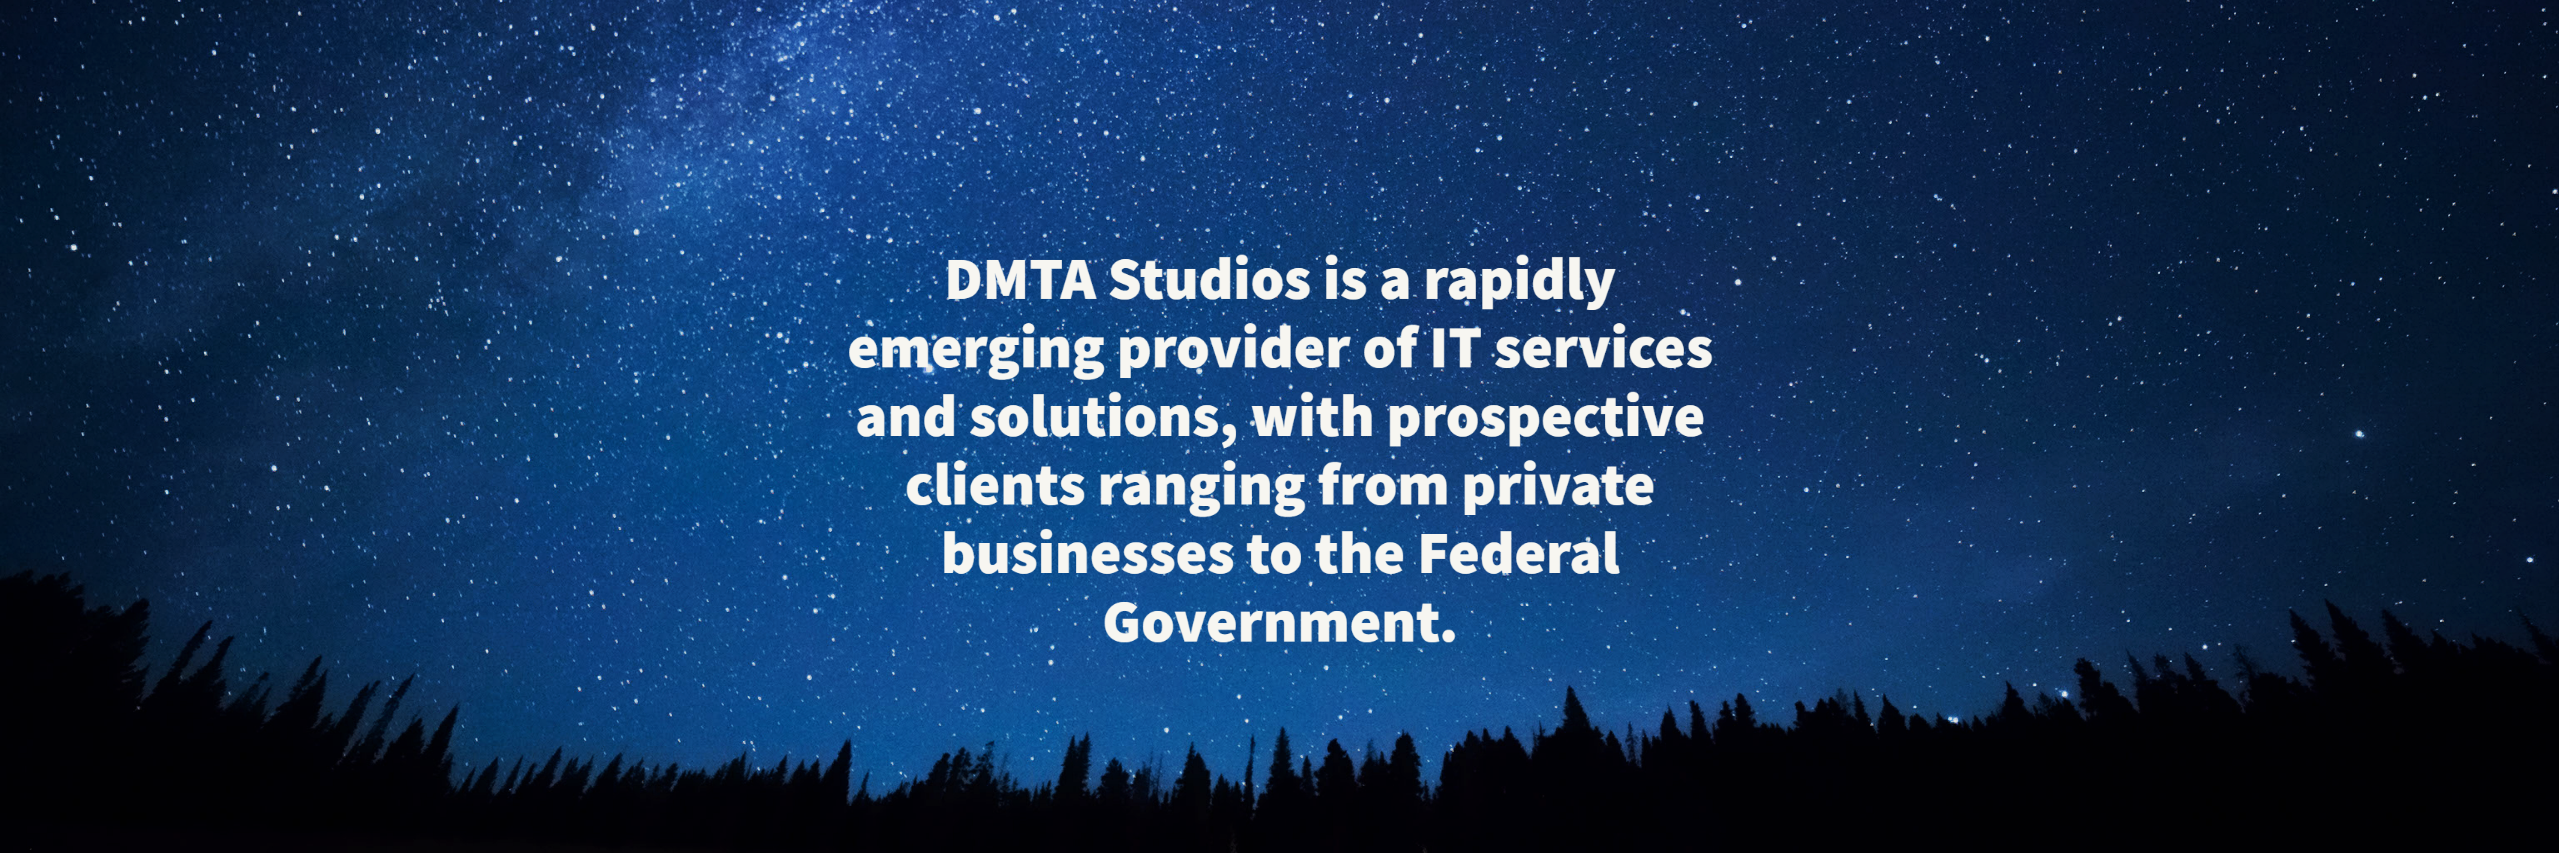 DMTA Studios is a rapidly emerging provider of IT services and solutions, with prospective clients ranging from private businesses to the Federal Government.